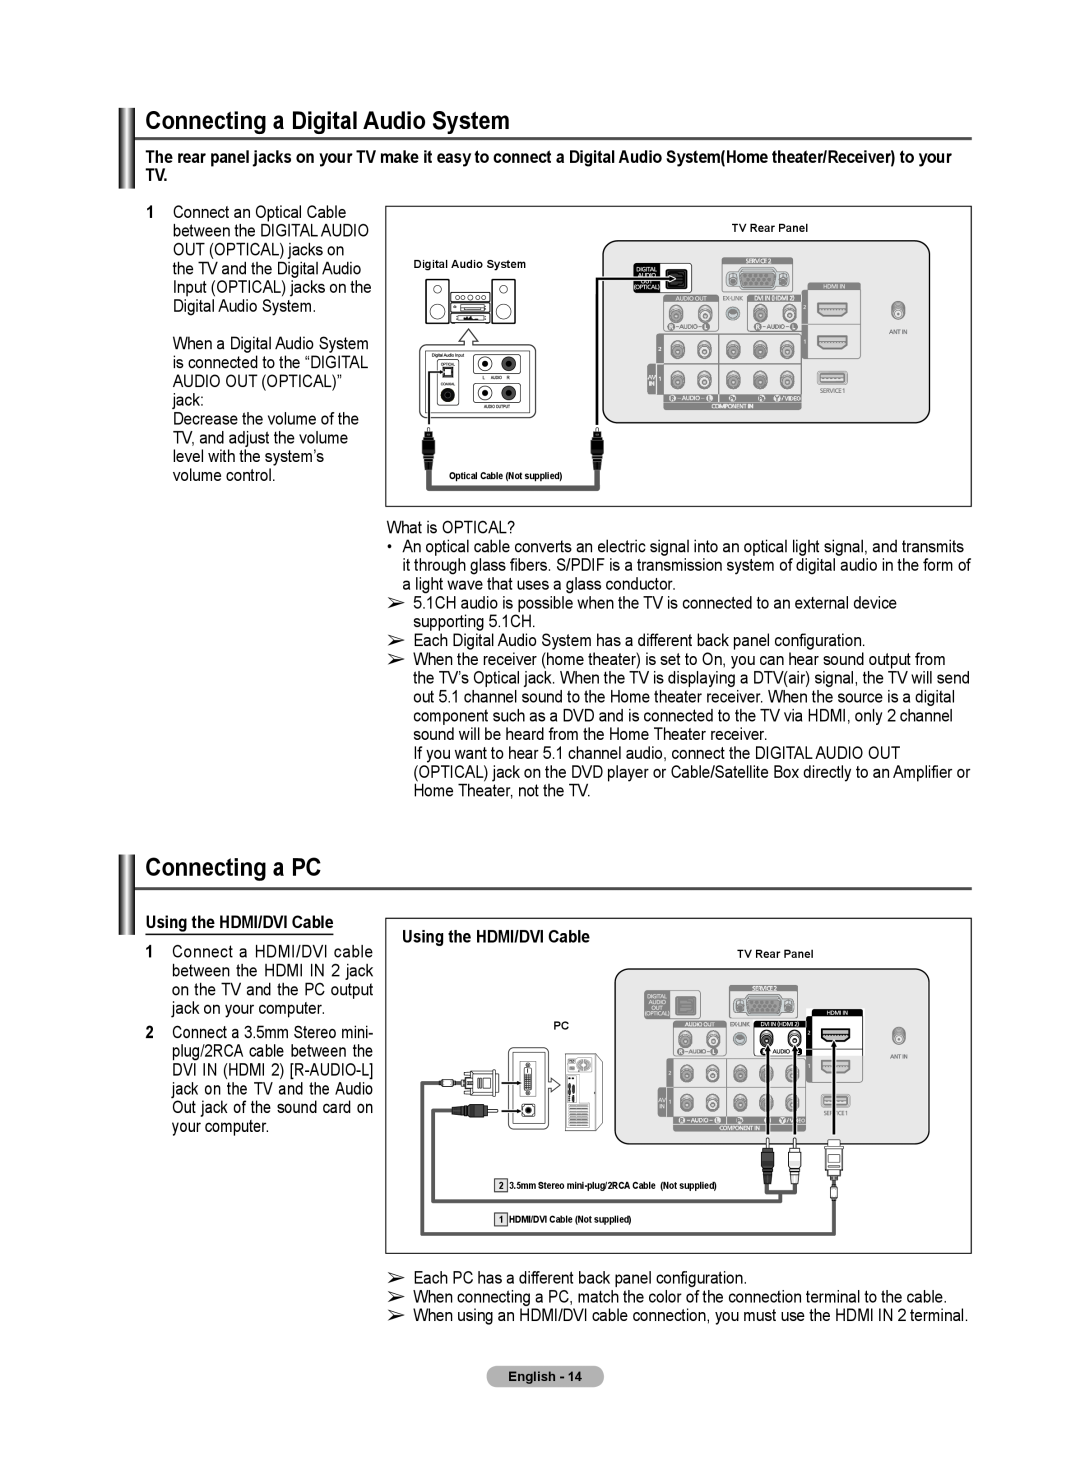 Samsung 510 user manual Connecting a Digital Audio System, Connecting a PC, Using the HDMI/DVI Cable 